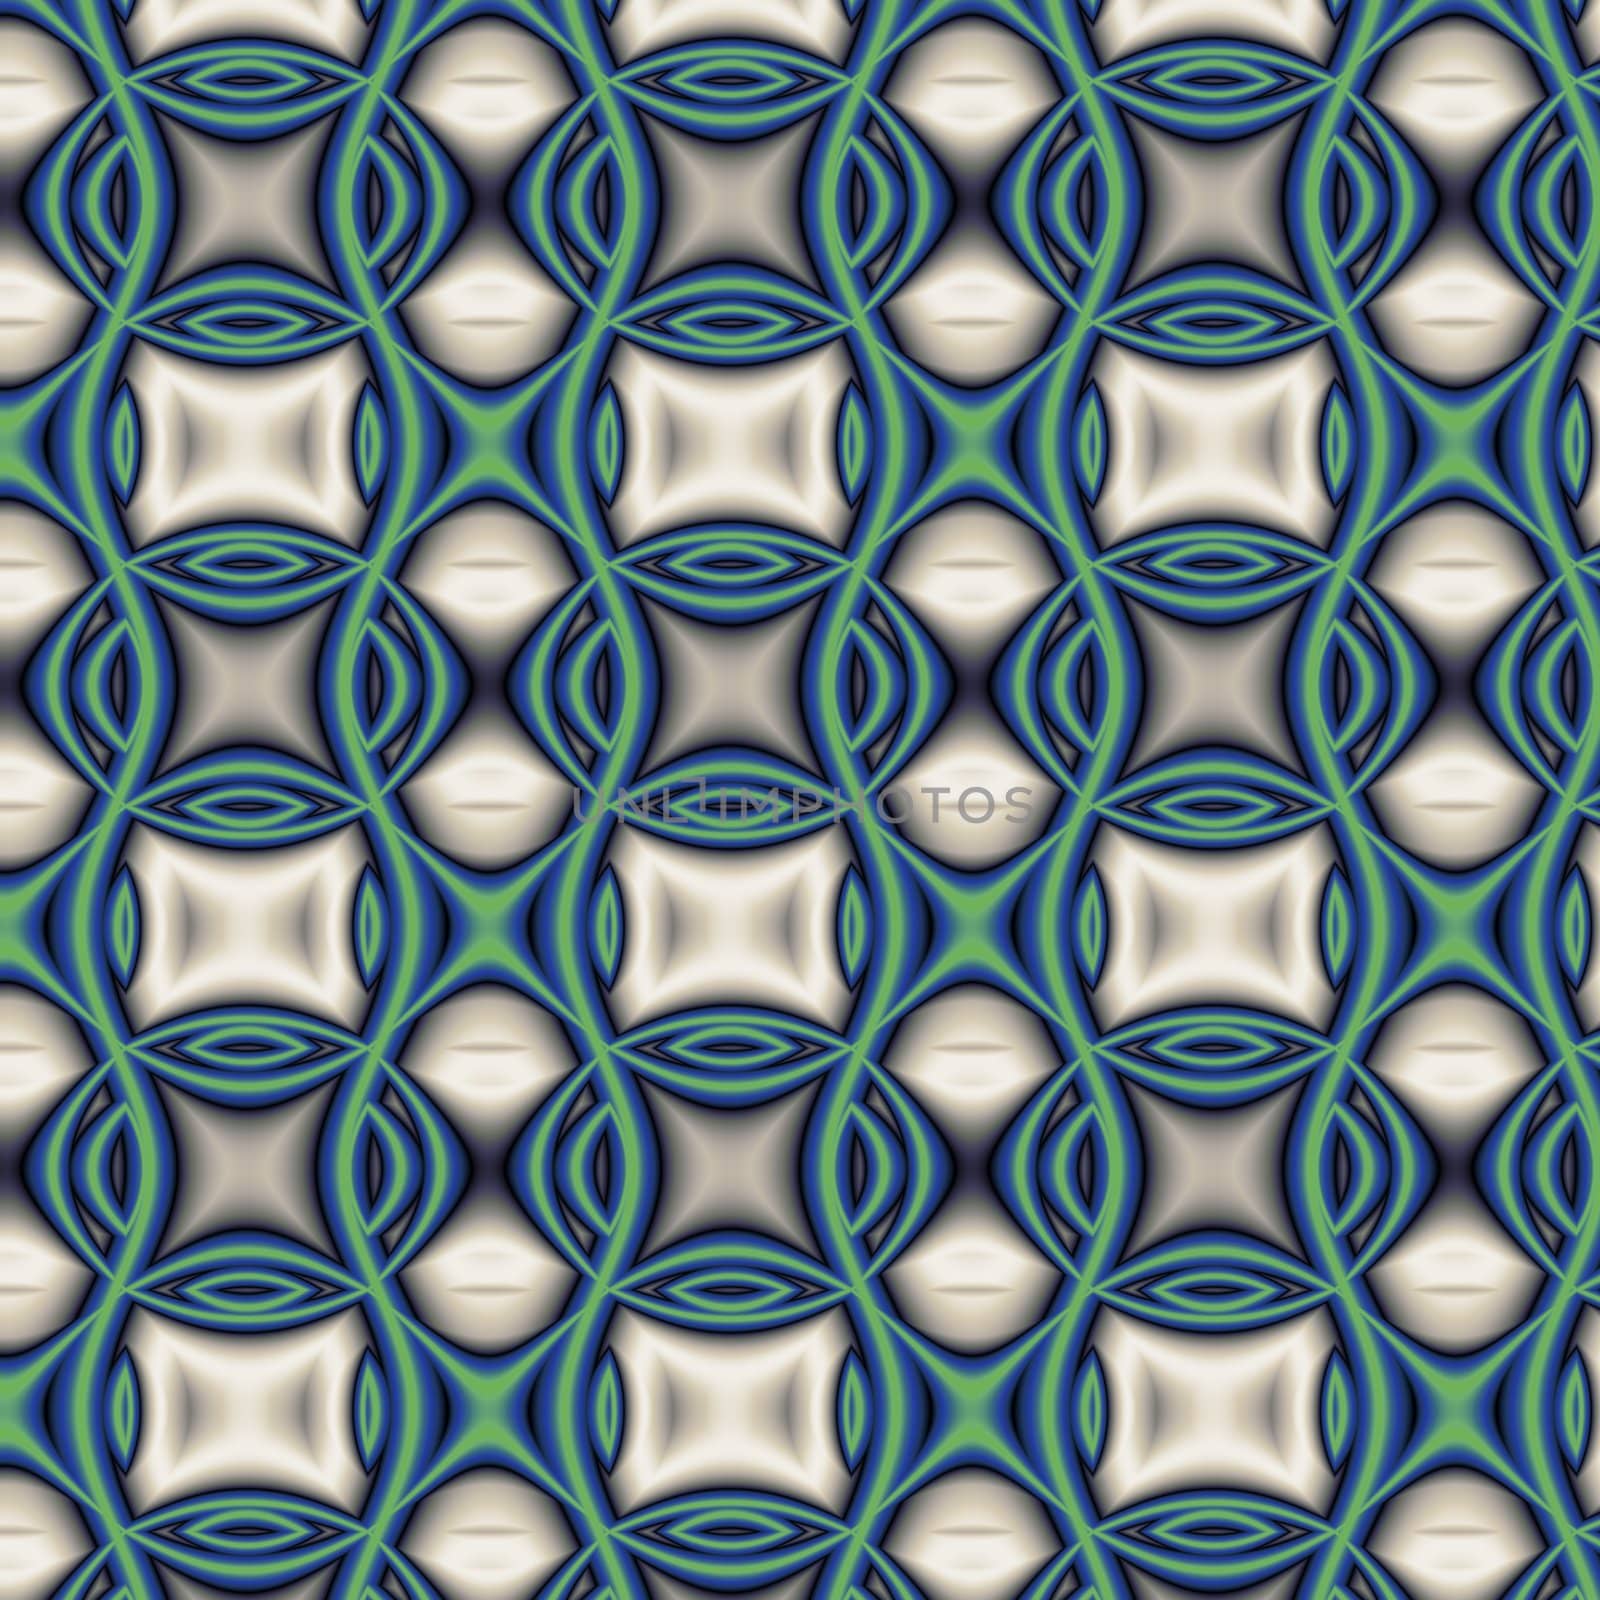 An abstract illustrated background of interlocking ovals, and lines.